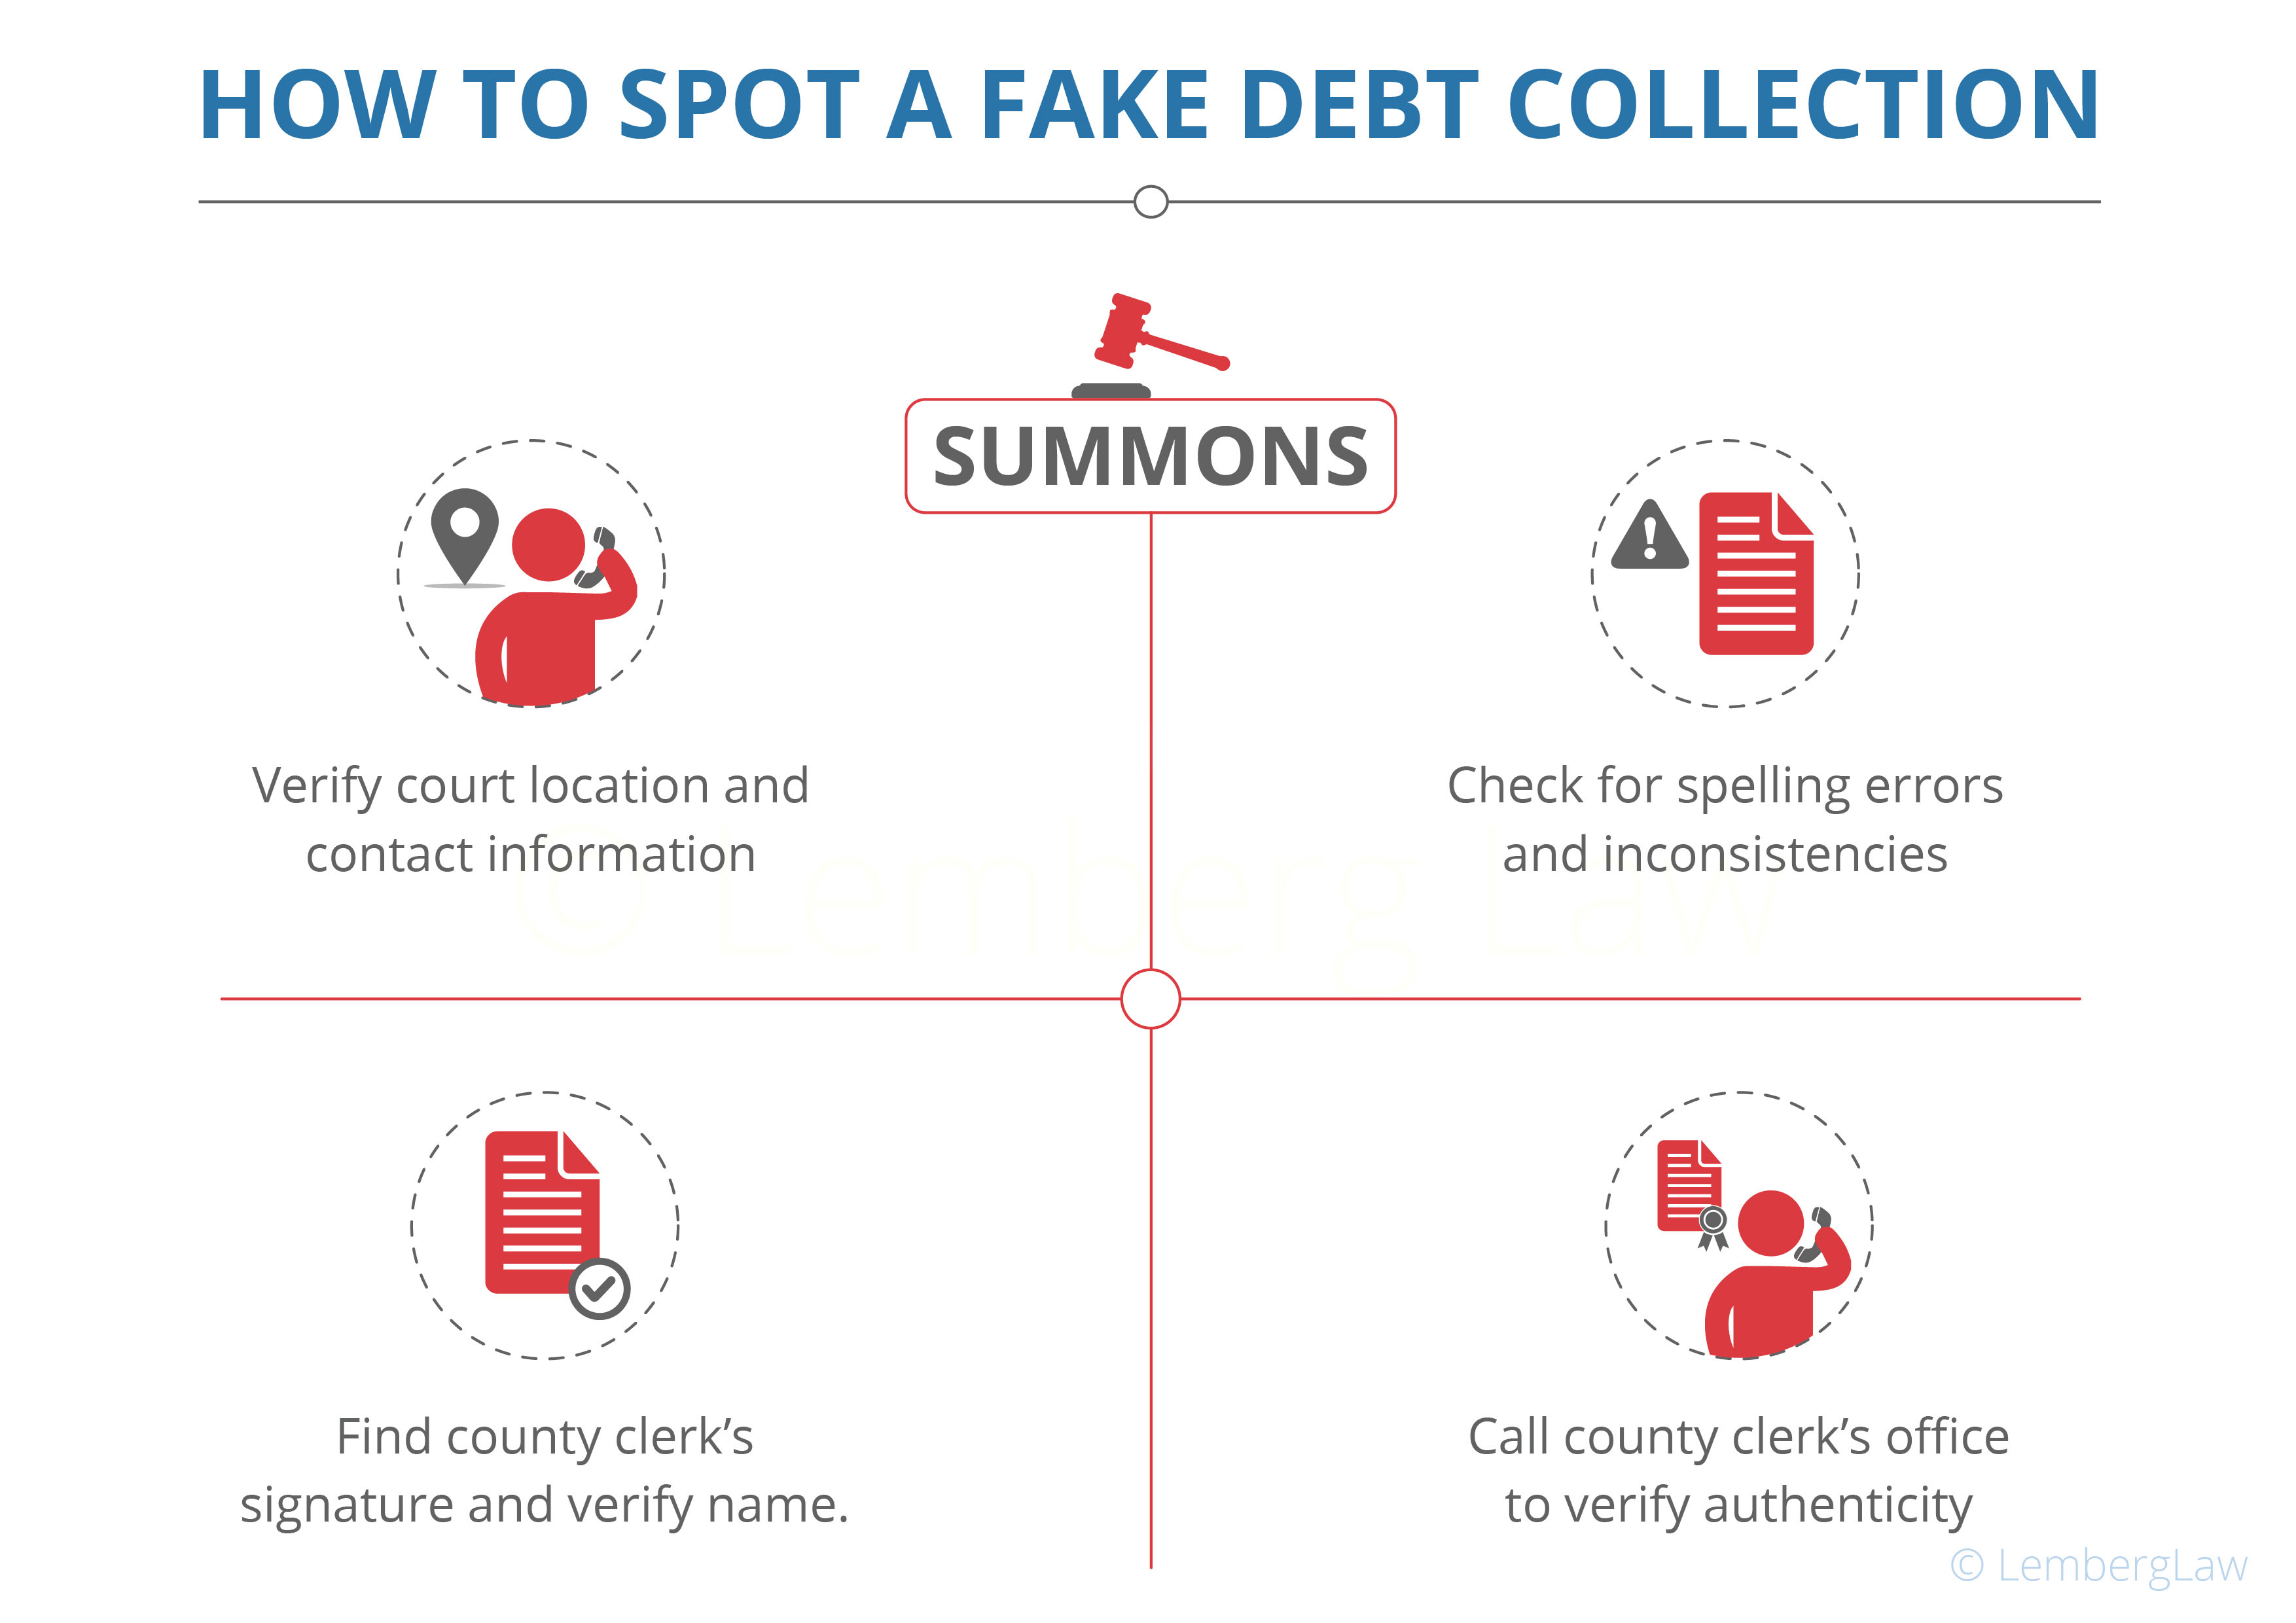 Fake Summons from Debt Collector?